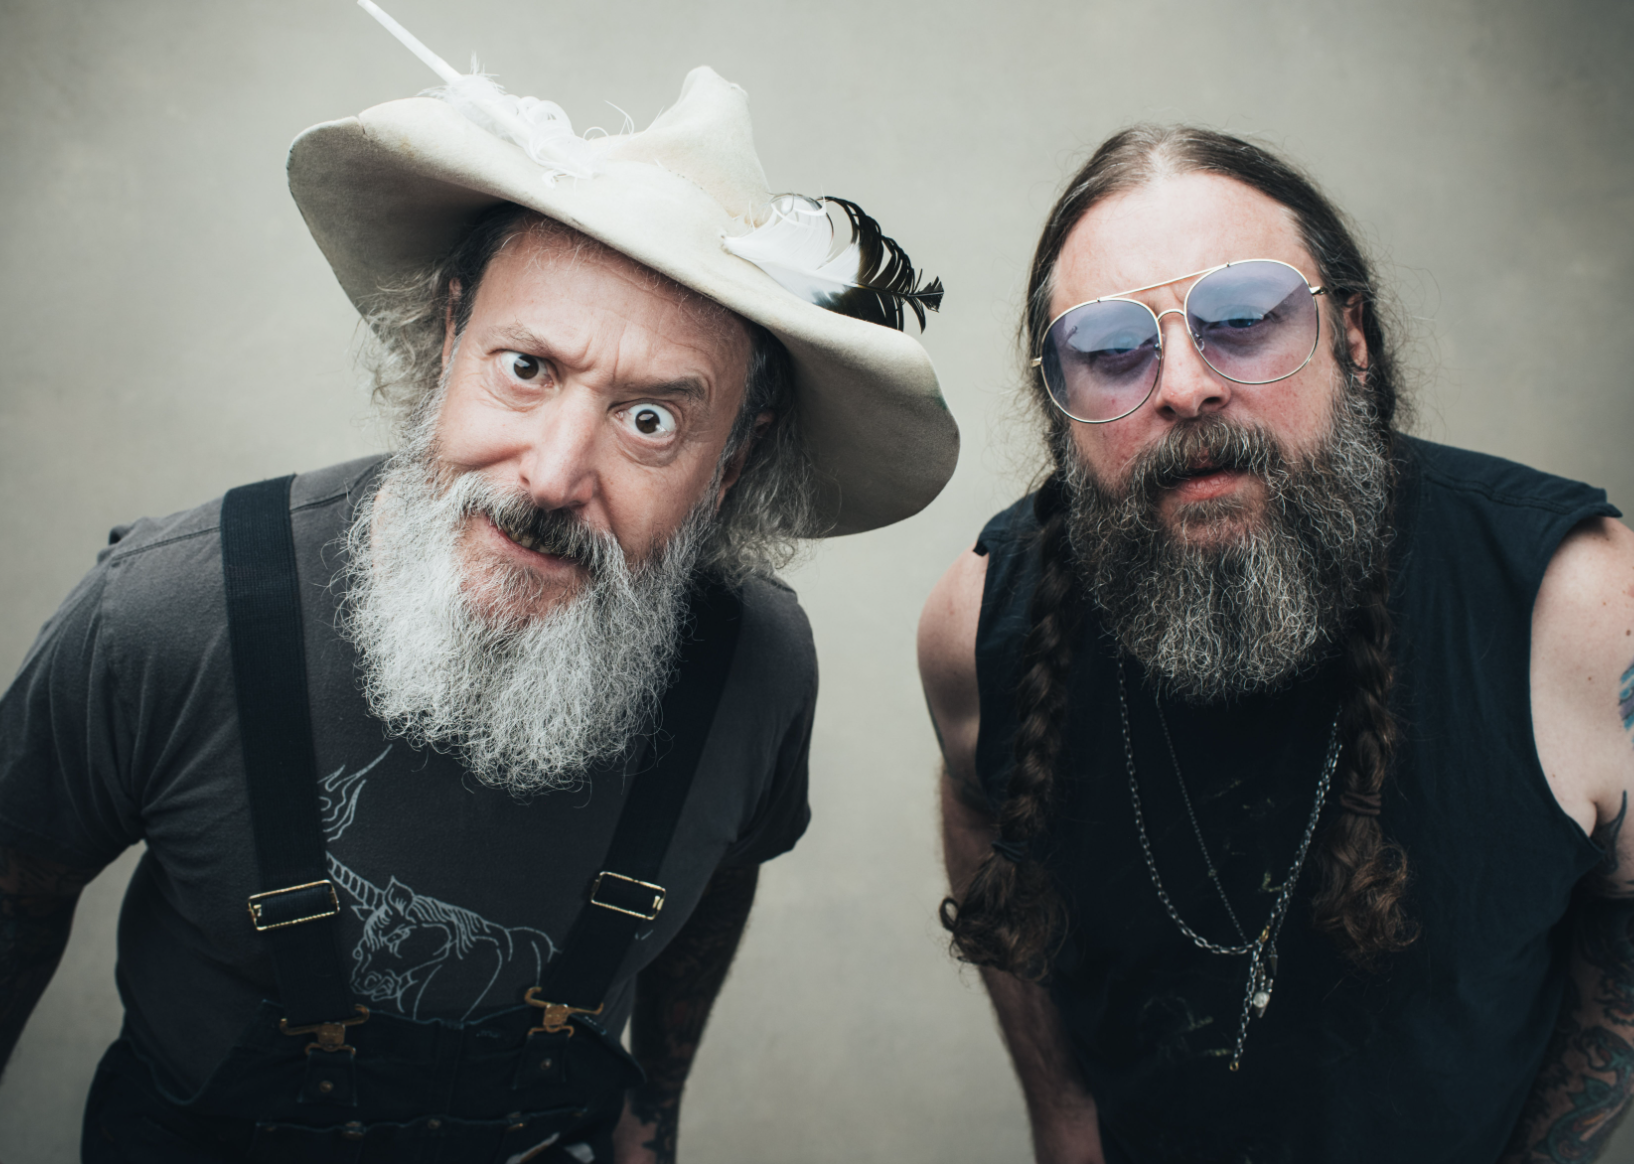 STEREO EMBERS EXCLUSIVE SINGLE/VIDEO PREVIEW – “Fungal Mountain Breakdown” from former Butthole Surfer JD Pinkus Accompanied by Tall Tall Trees Banjoist Extraordinaire Mike Savino